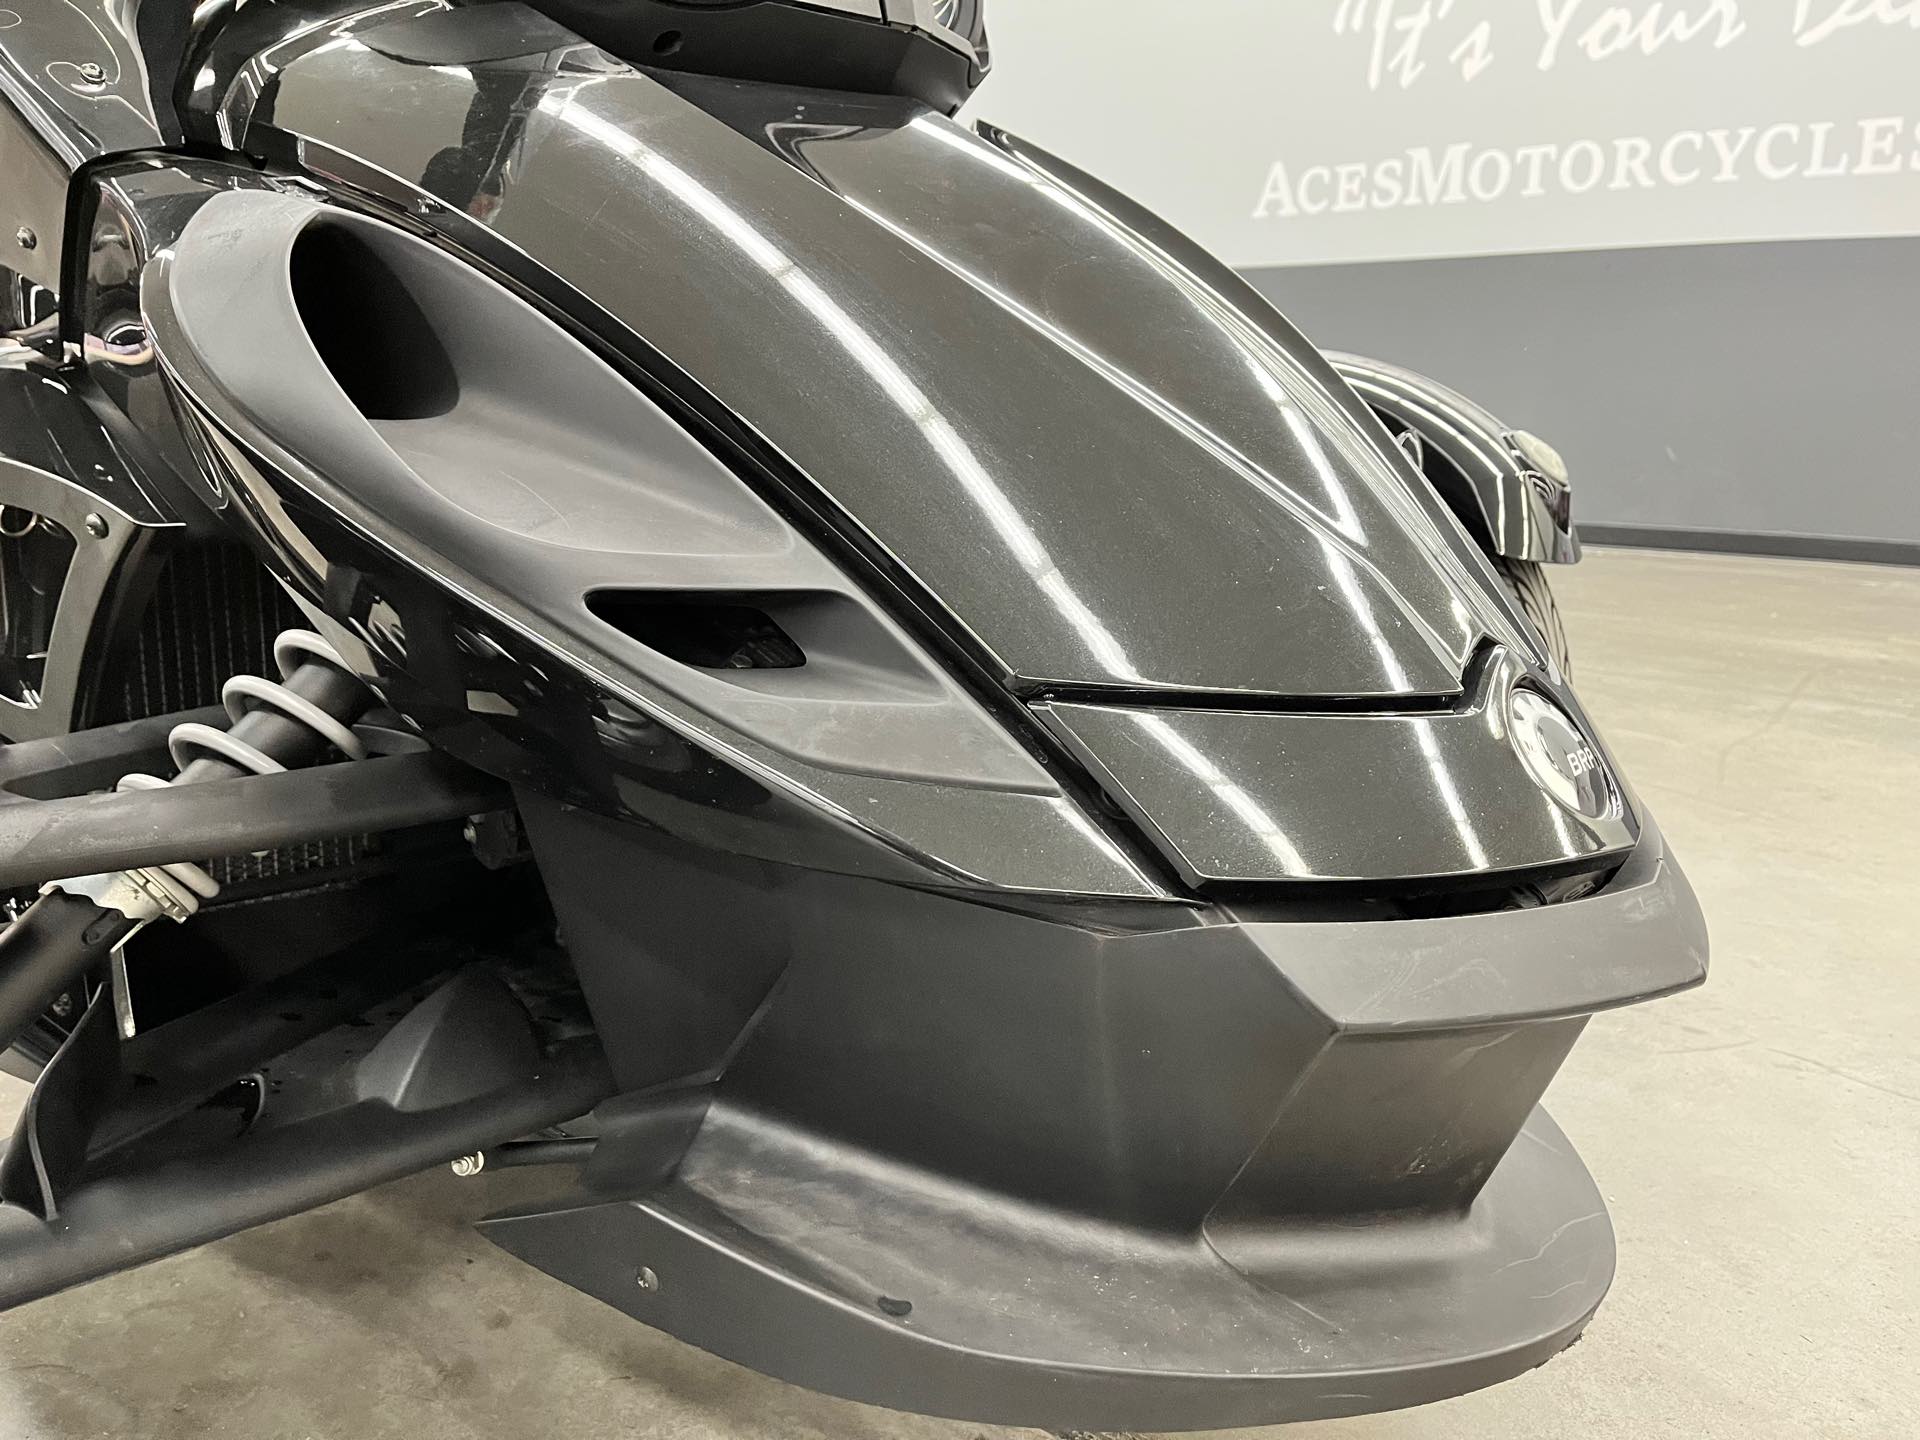 2012 CAN-AM SPYDER RS at Aces Motorcycles - Denver